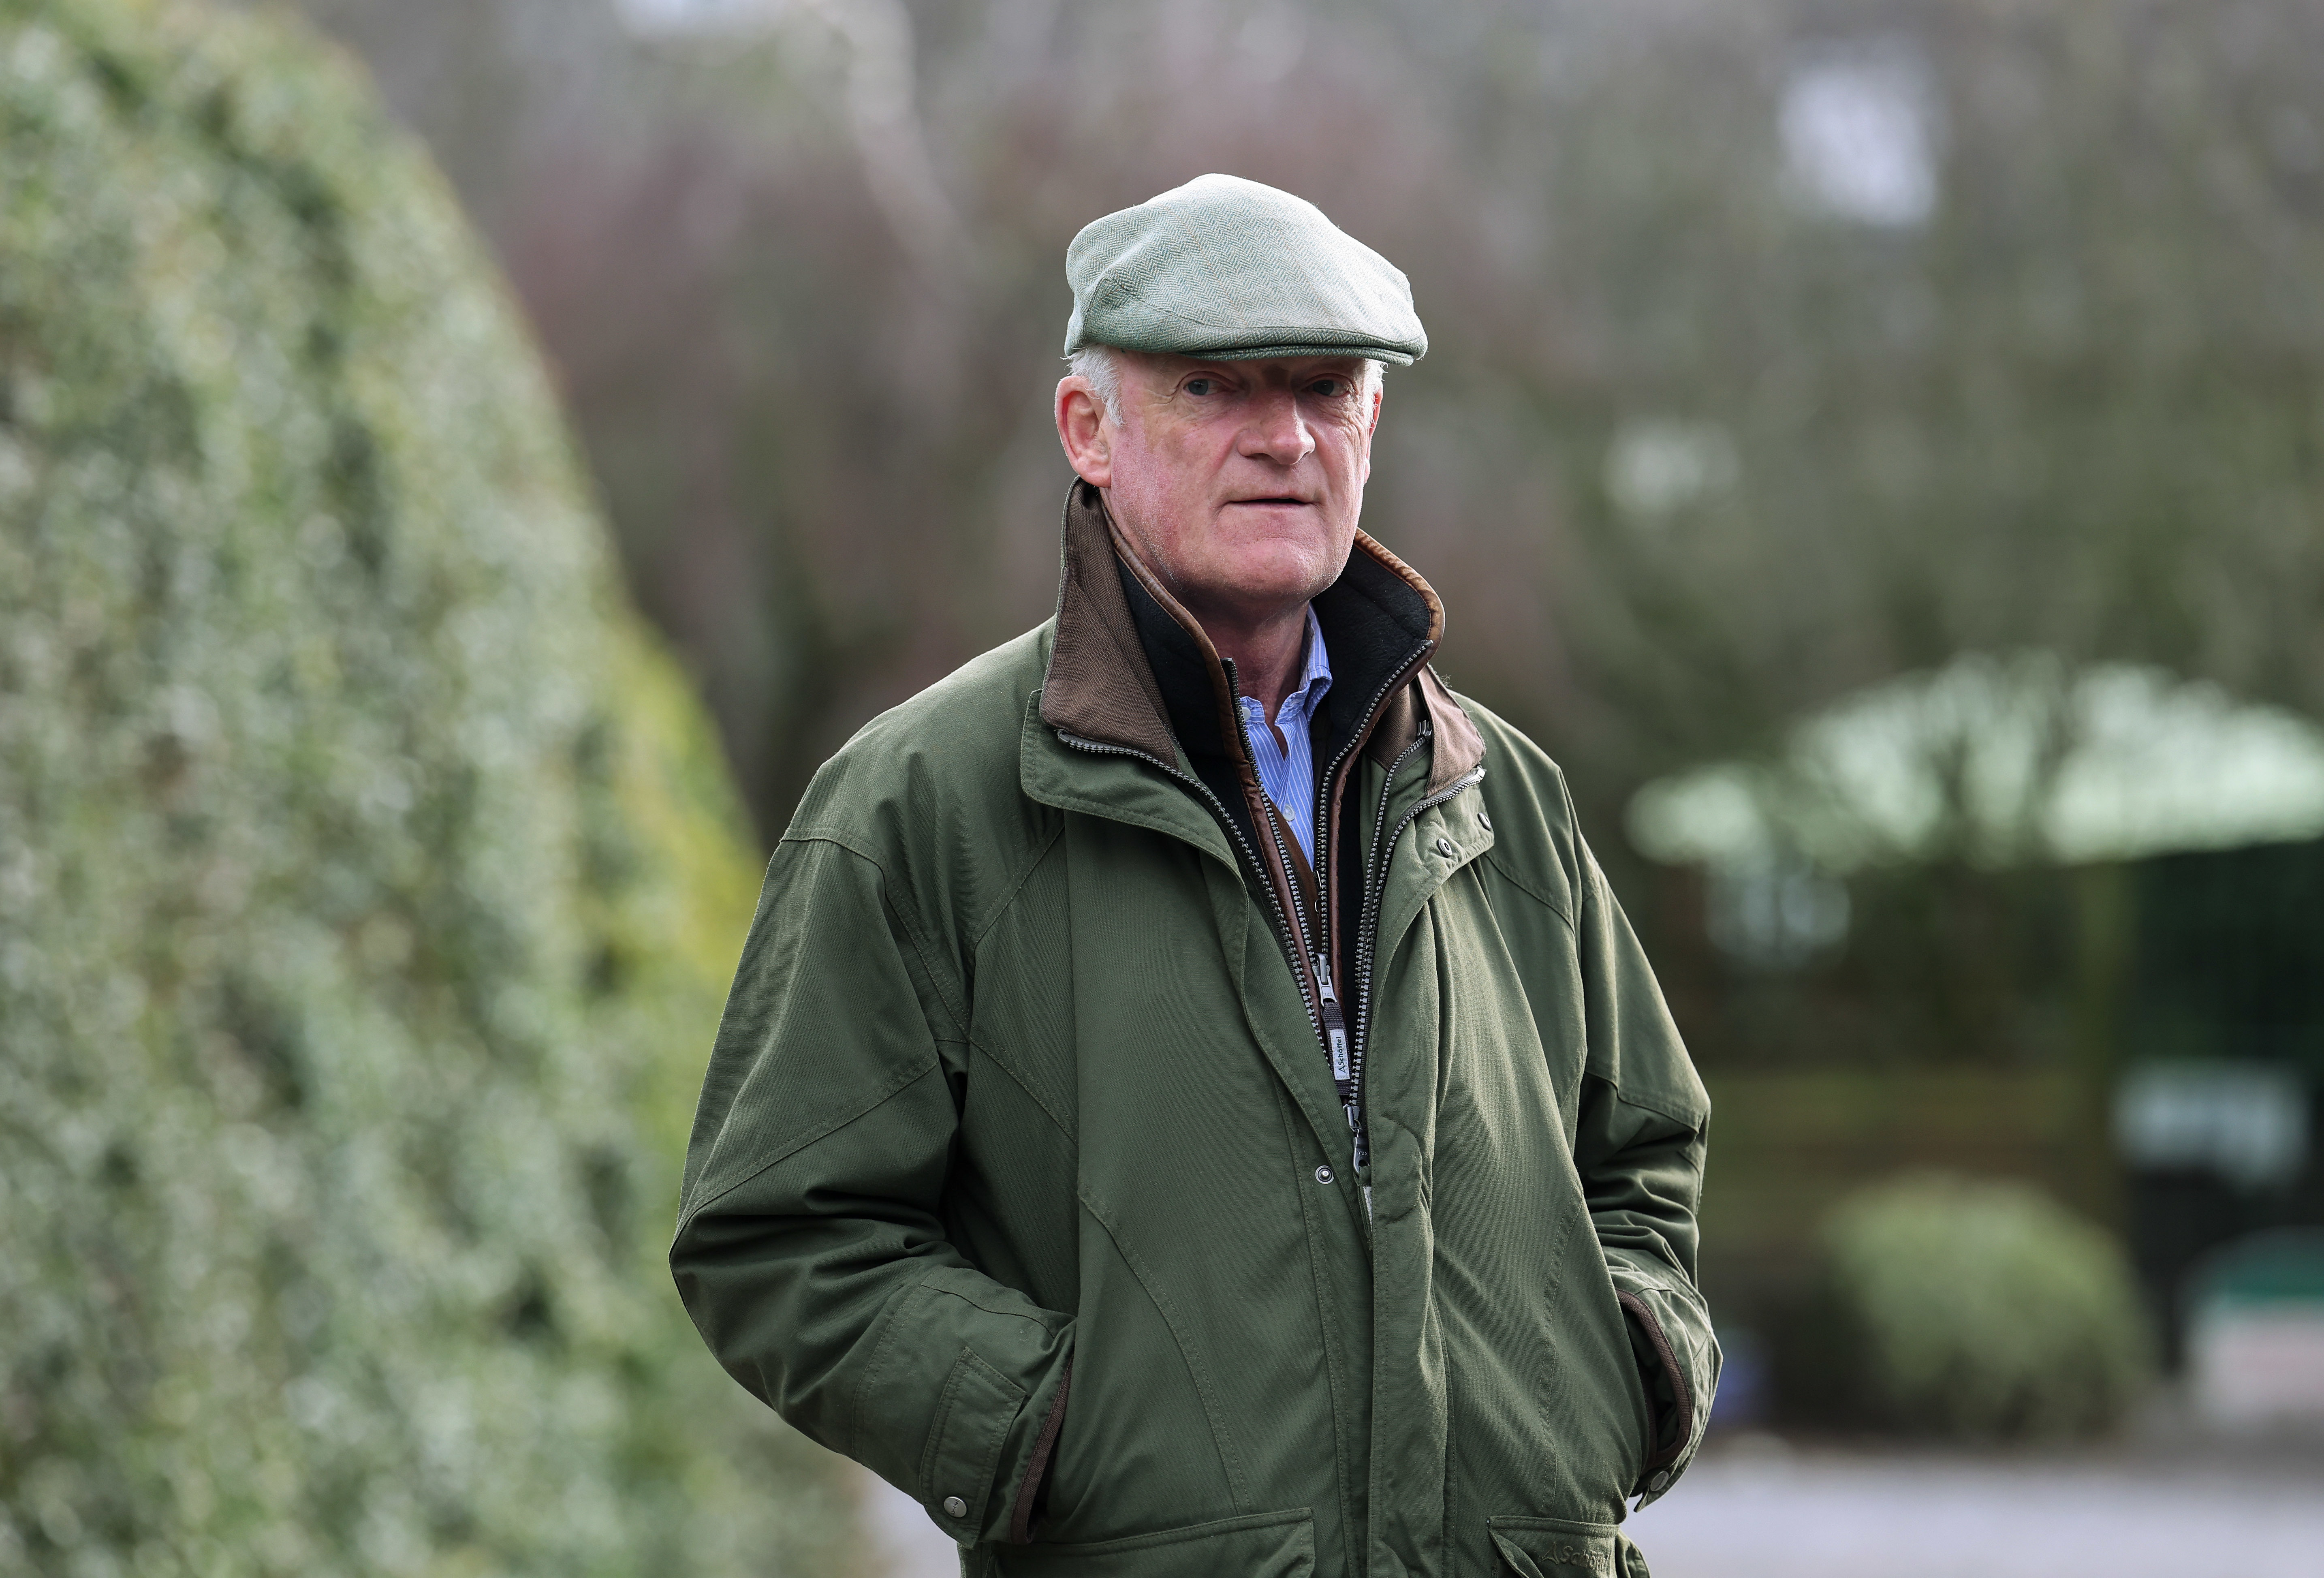 Willie Mullins has an enviable record in the Champion Bumper